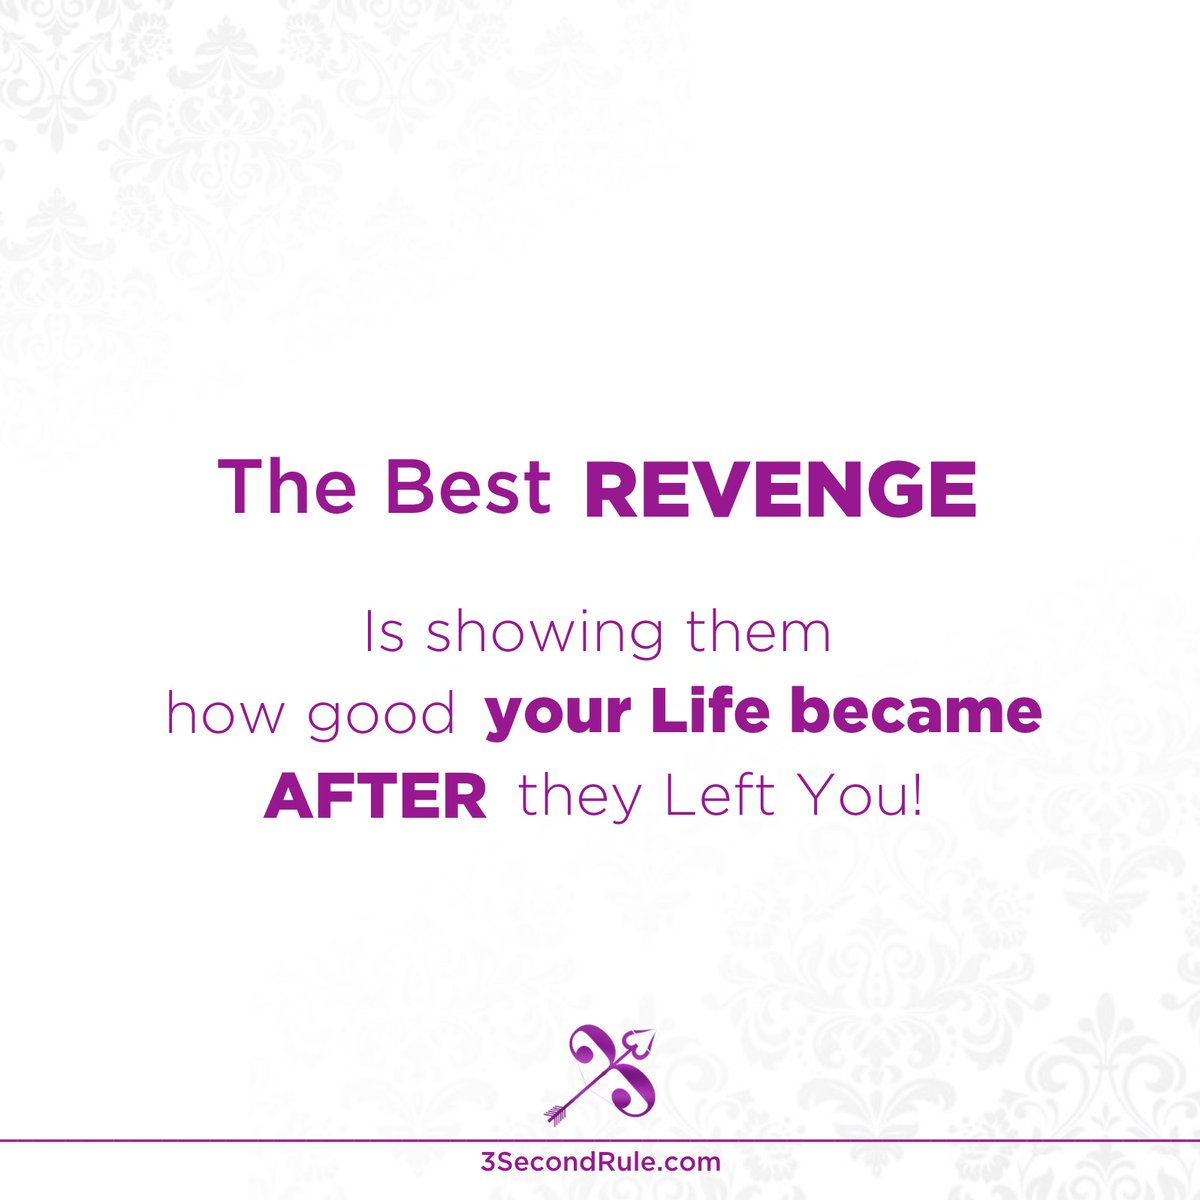 Oh and Relationships don't END.....
they simply 'Complete'.

Now go Level up your Life so Fast you left your Ex in the Quantum Realm. 

#Breakup #divorce #heartbreak #bouncingback #relationships #revence #datinggame #getrealgame #menshealth